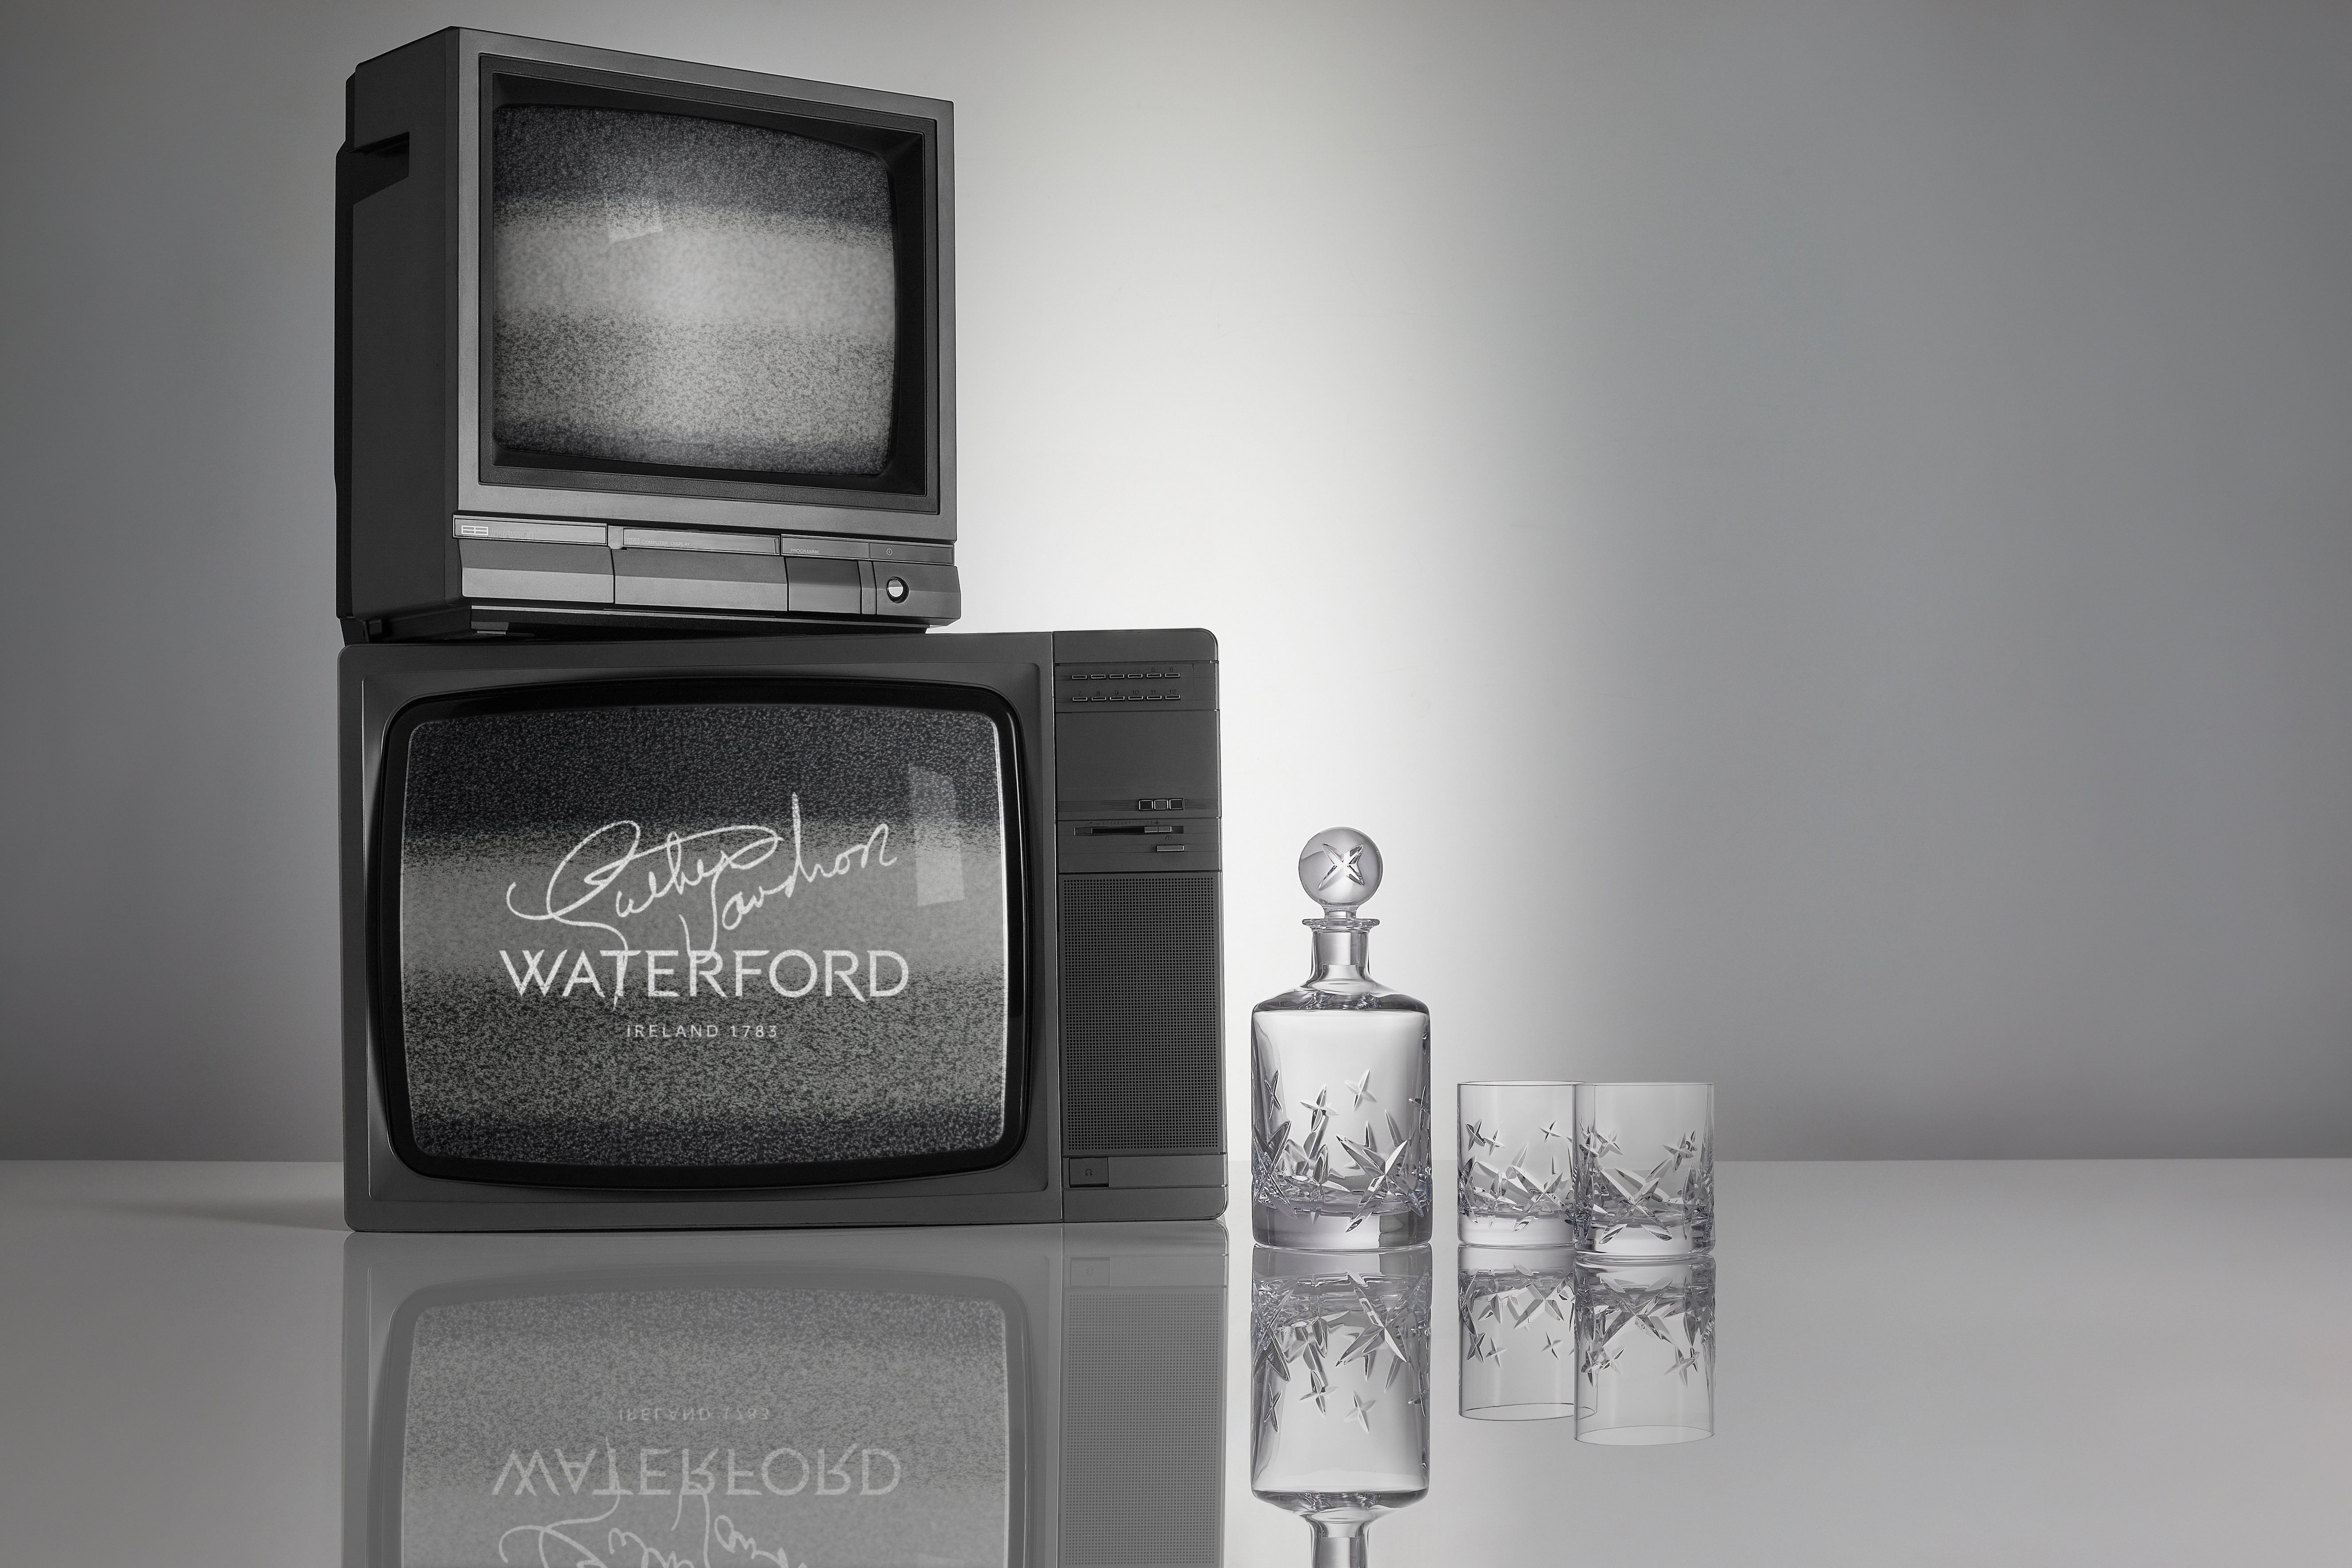 Waterford_COLLABORATIONS_Luther_Vandross_Styled_03_Original.jpg